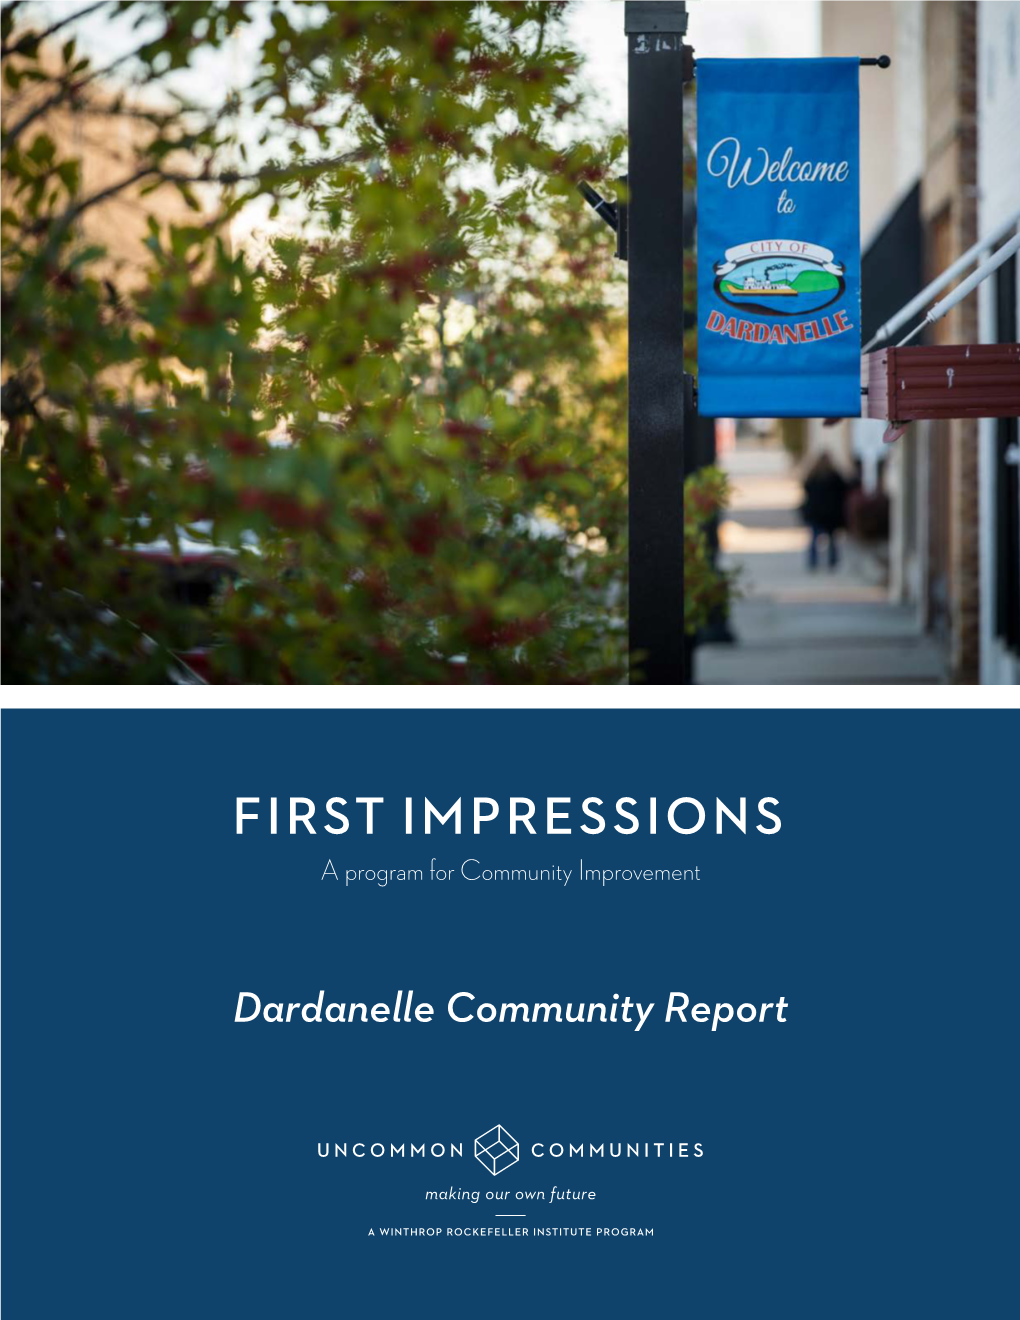 FIRST IMPRESSIONS a Program for Community Improvement